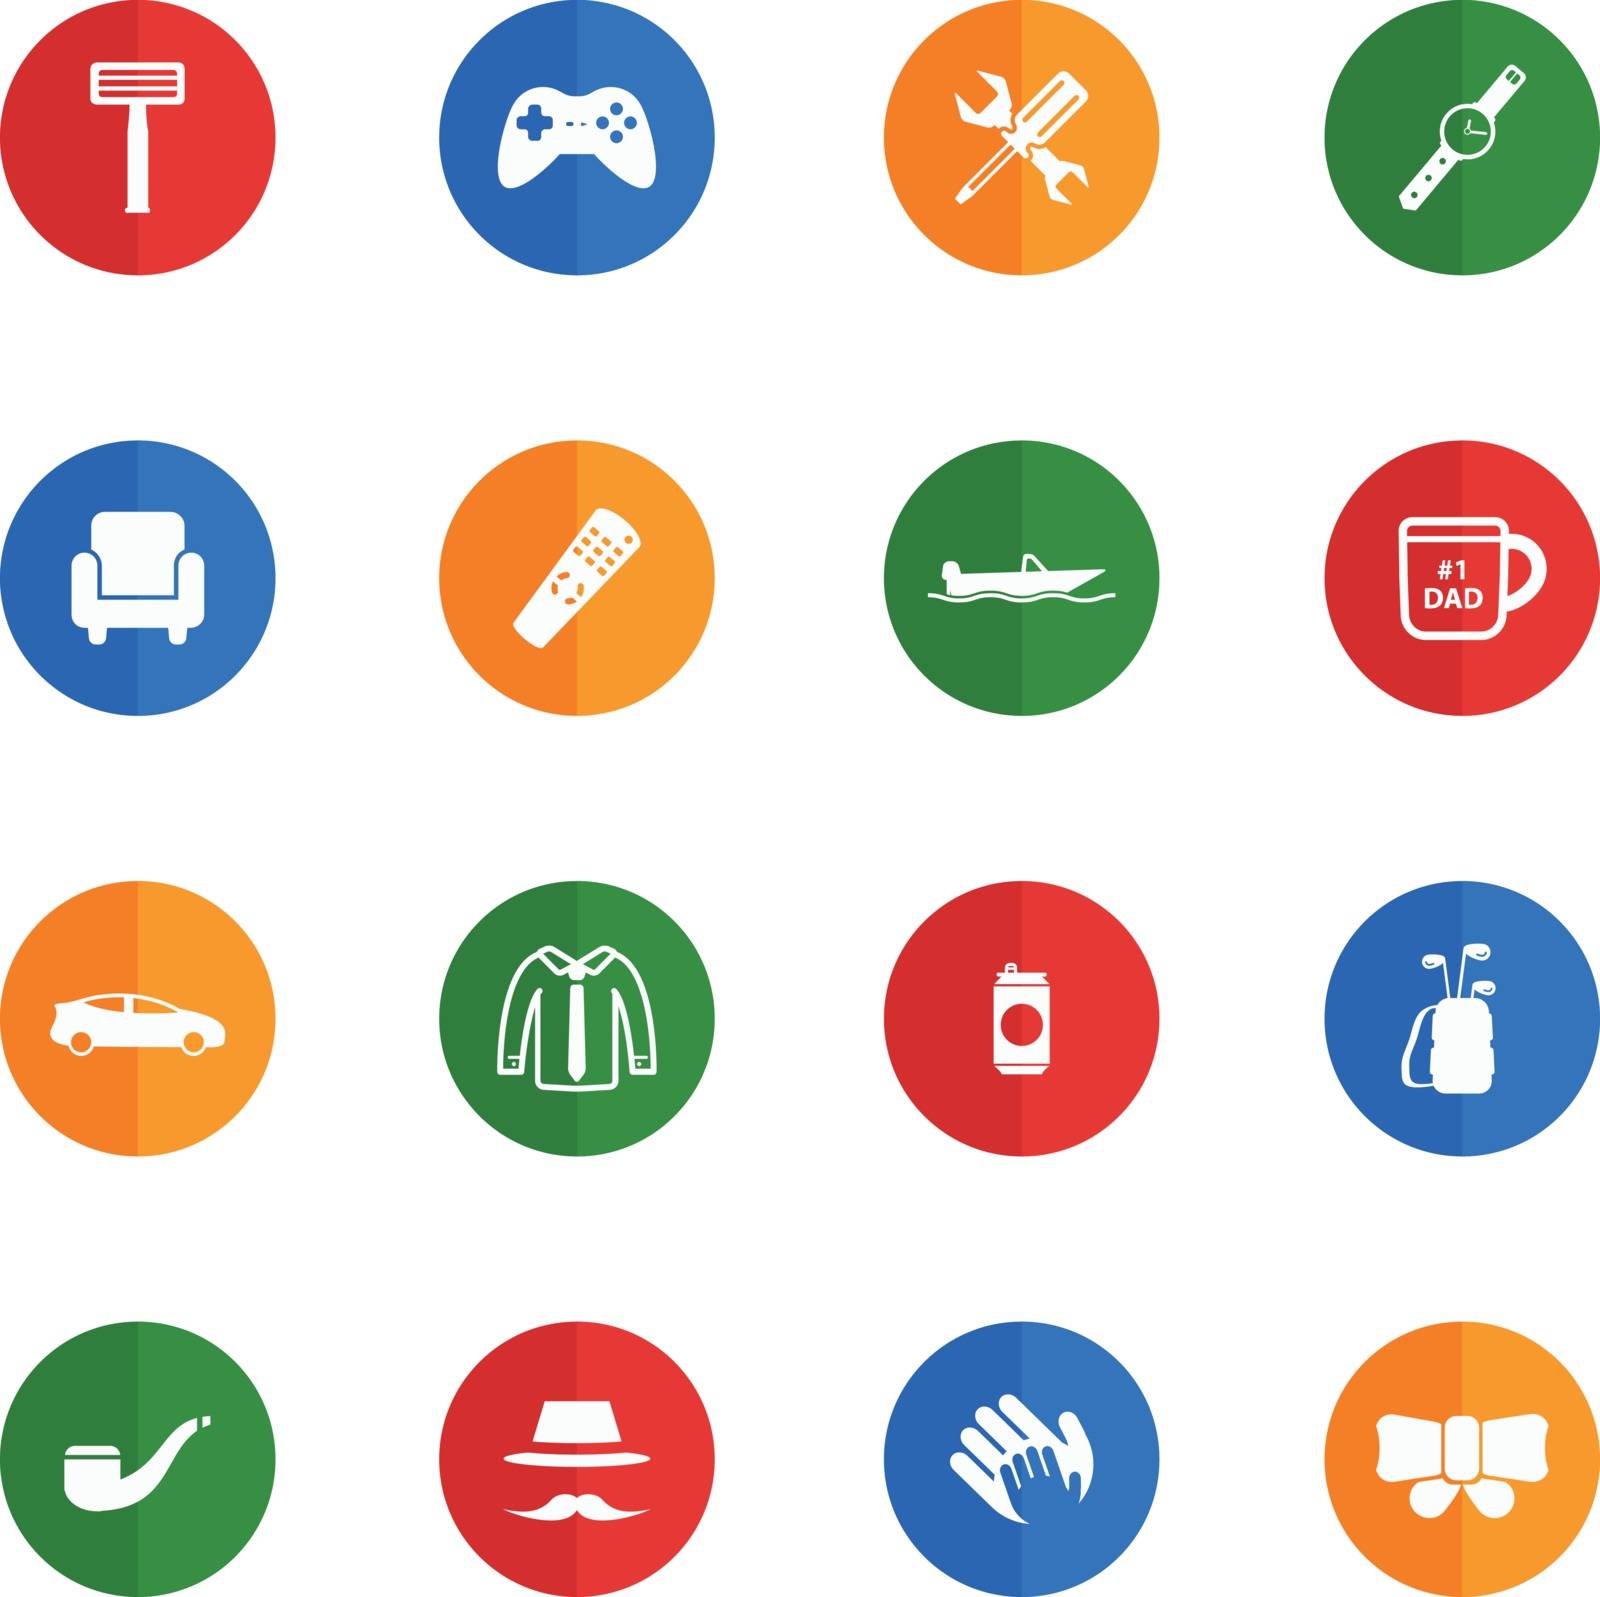 Fathers day icons set for web sites and user interface